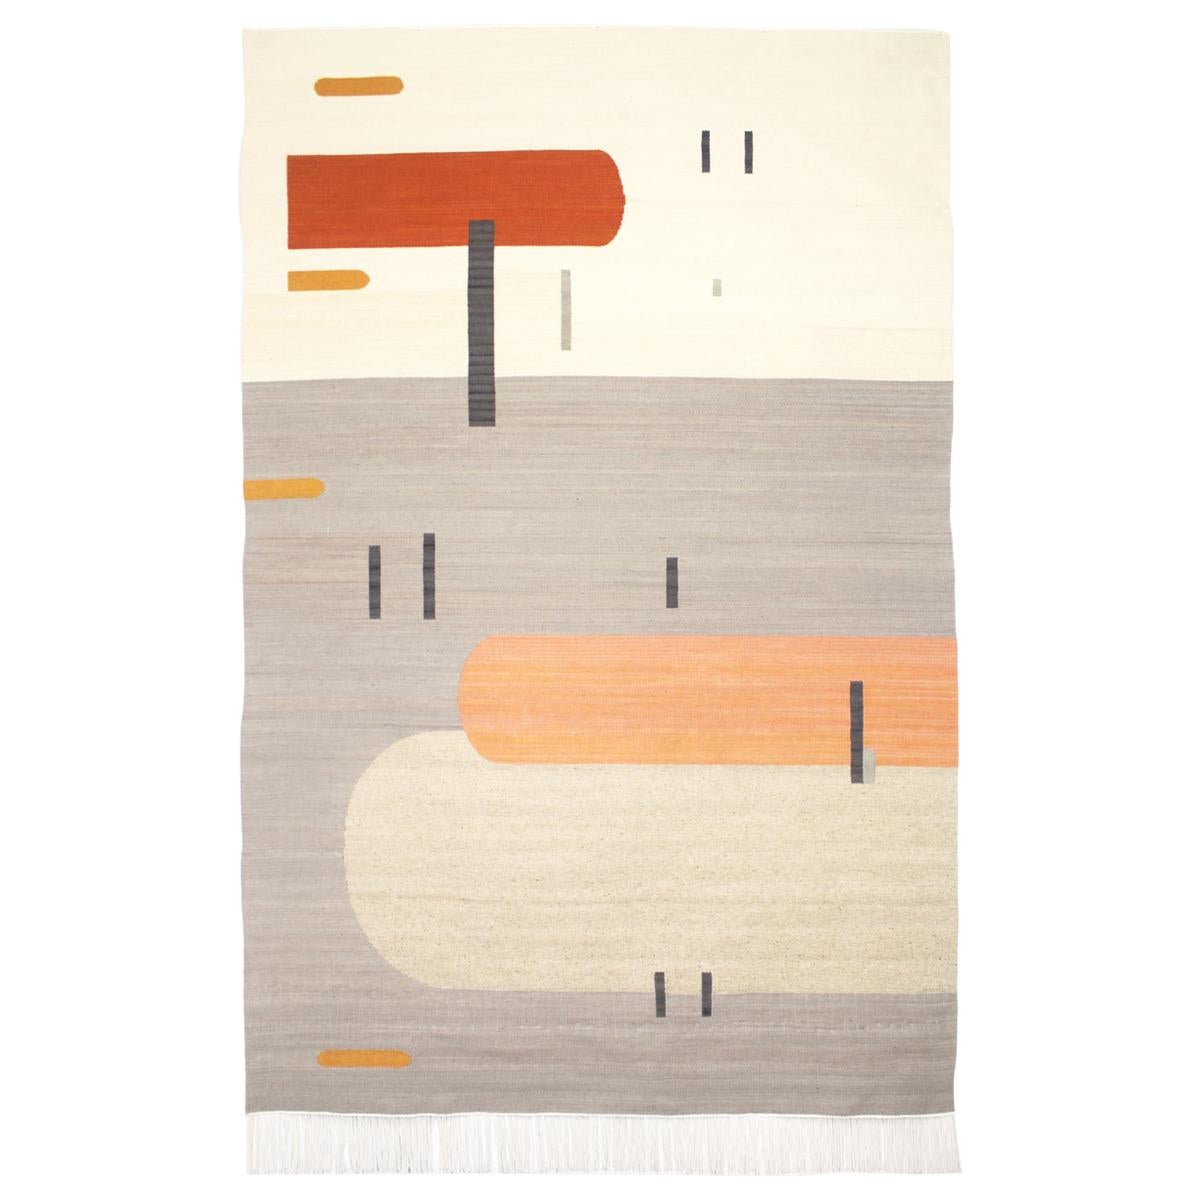 Handwoven Wool Rug / Kilim, Grey, Coral and Sand, Natural Dye, by Andrew Boos